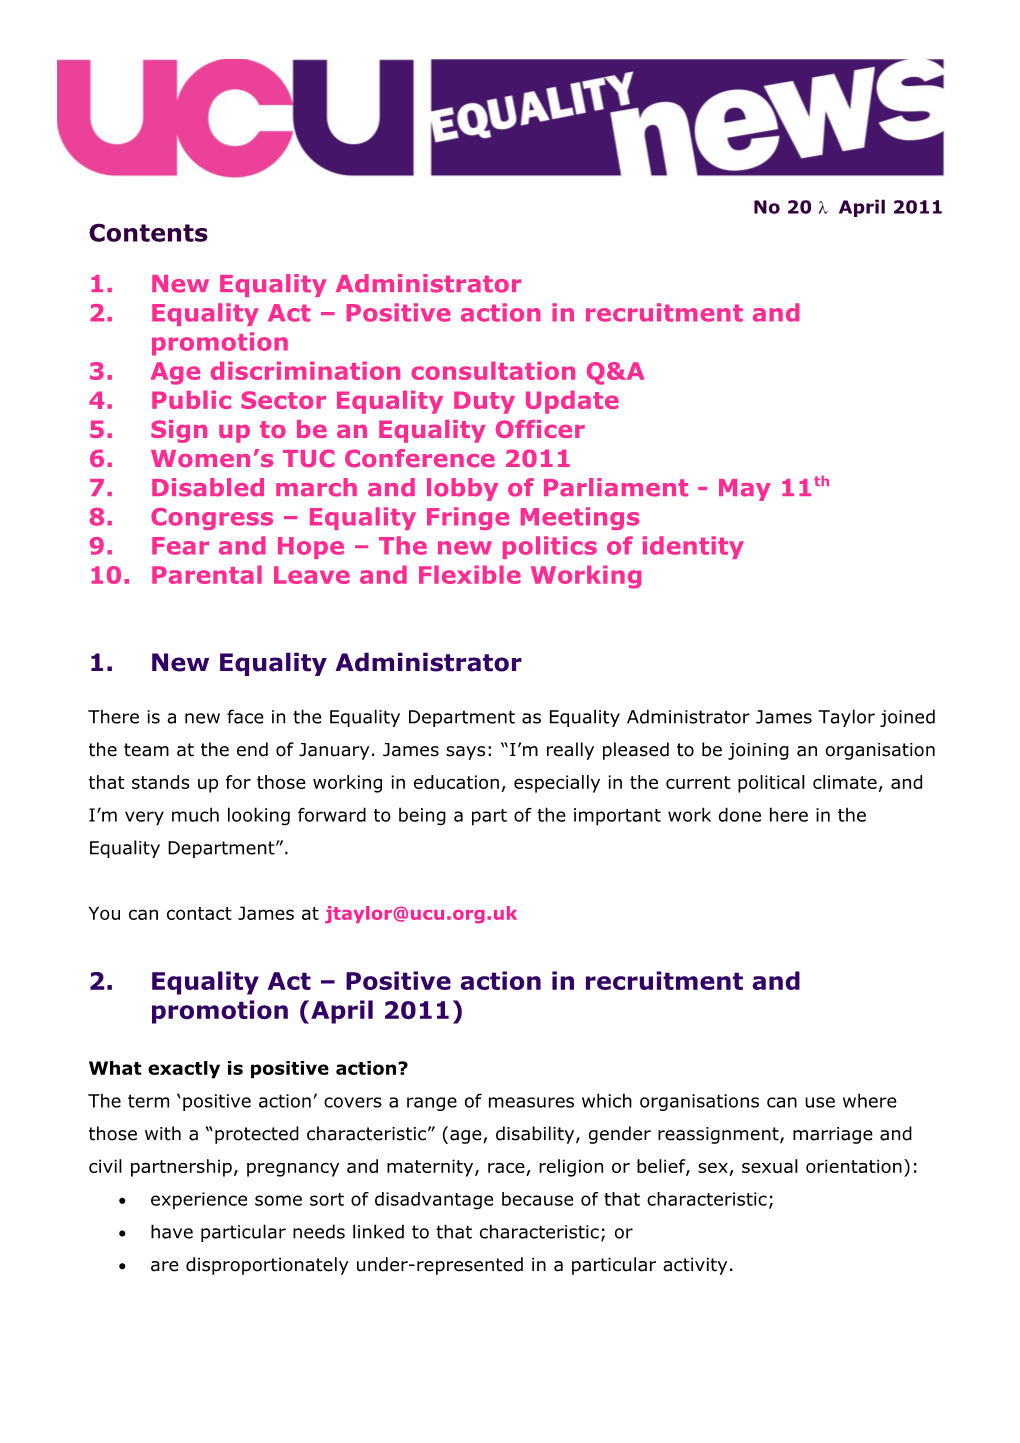 2.Equality Act Positive Action in Recruitment and Promotion